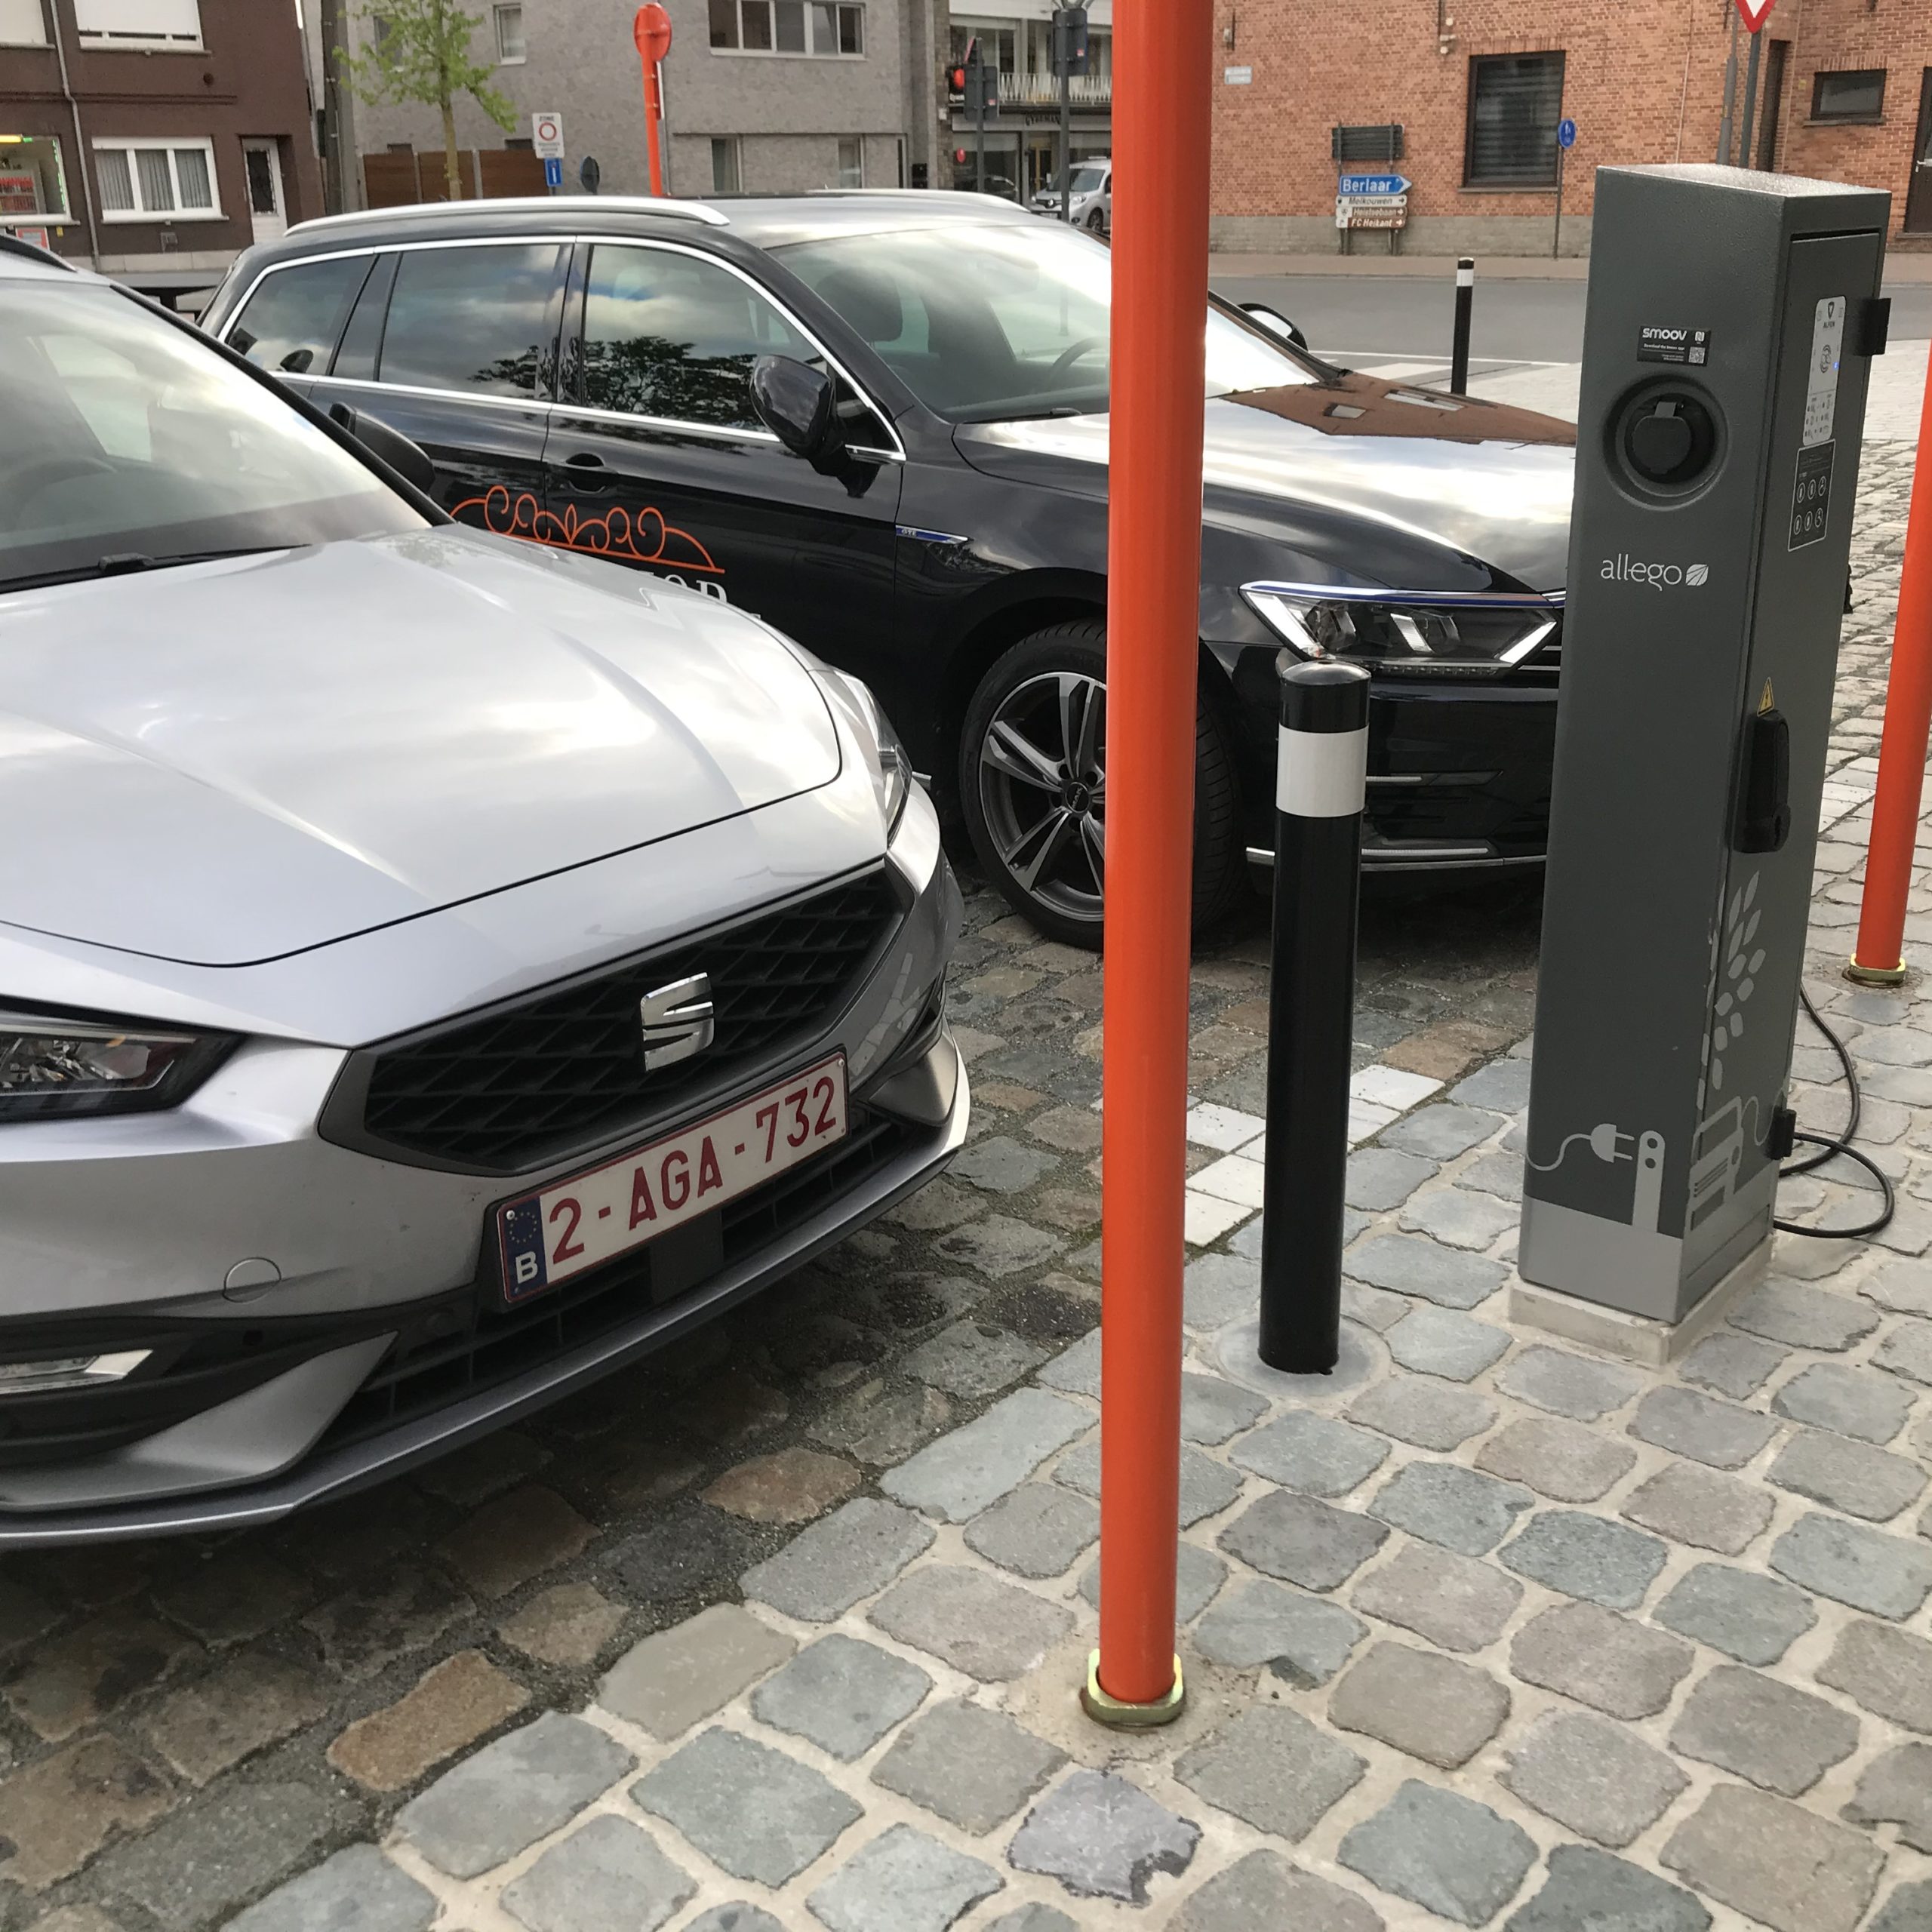 Clear rules for charging station users needed